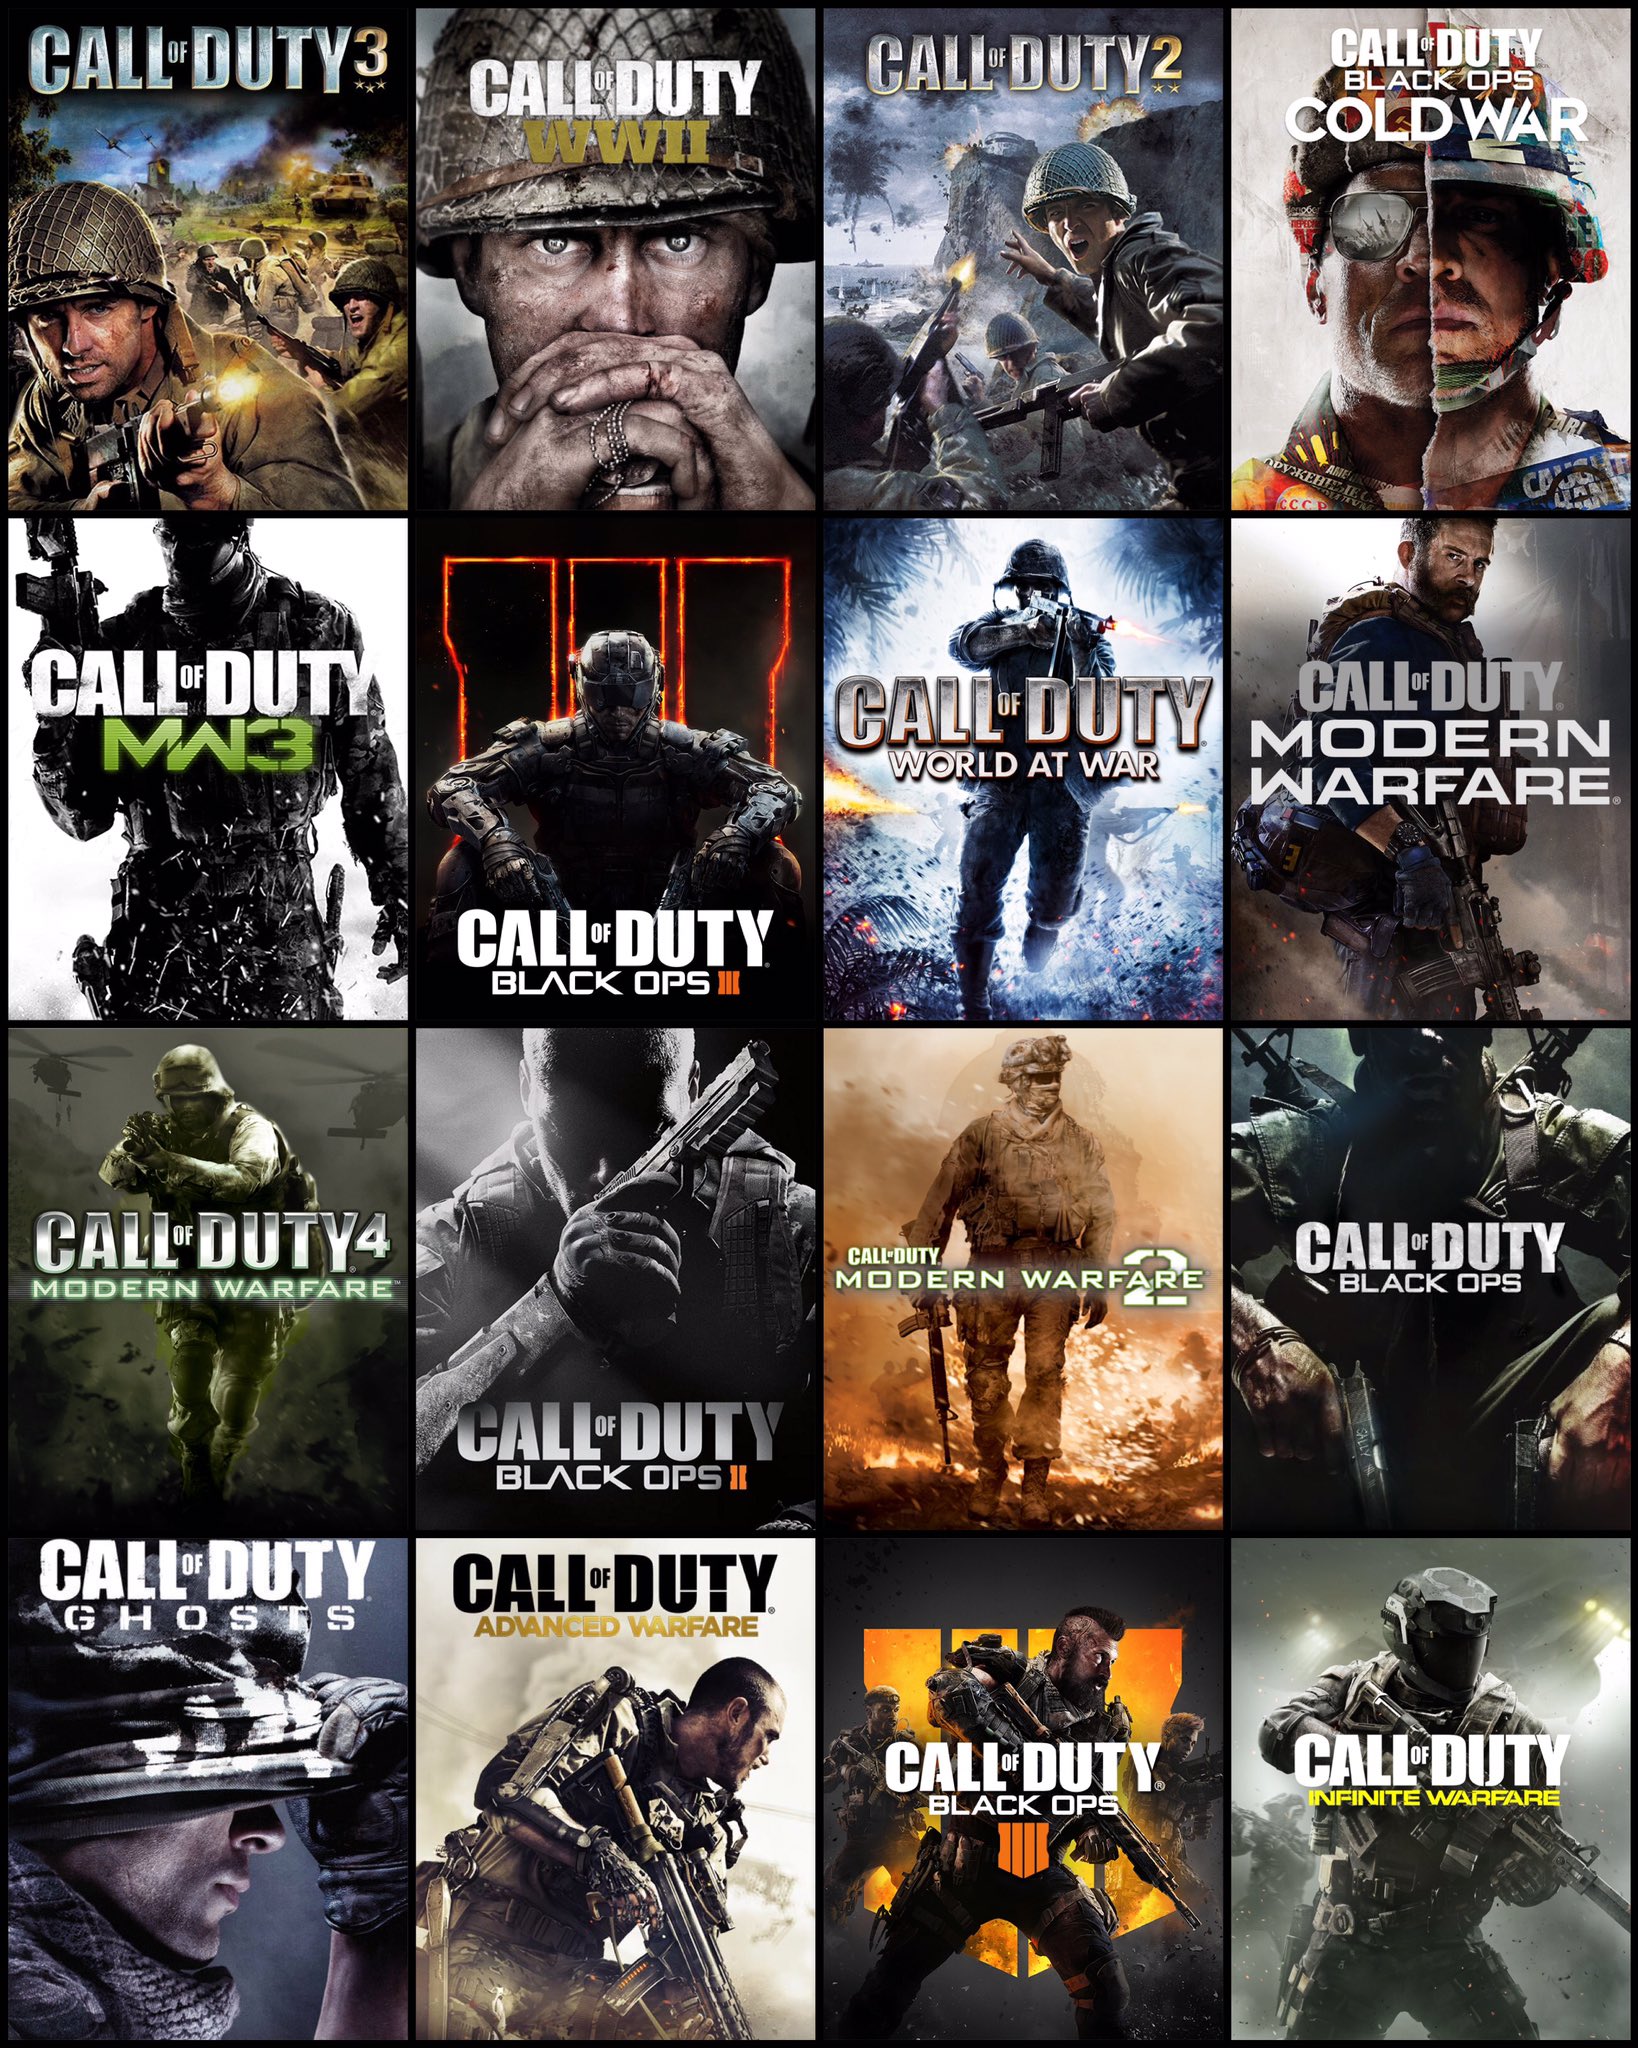 All the Call of Duty games in order